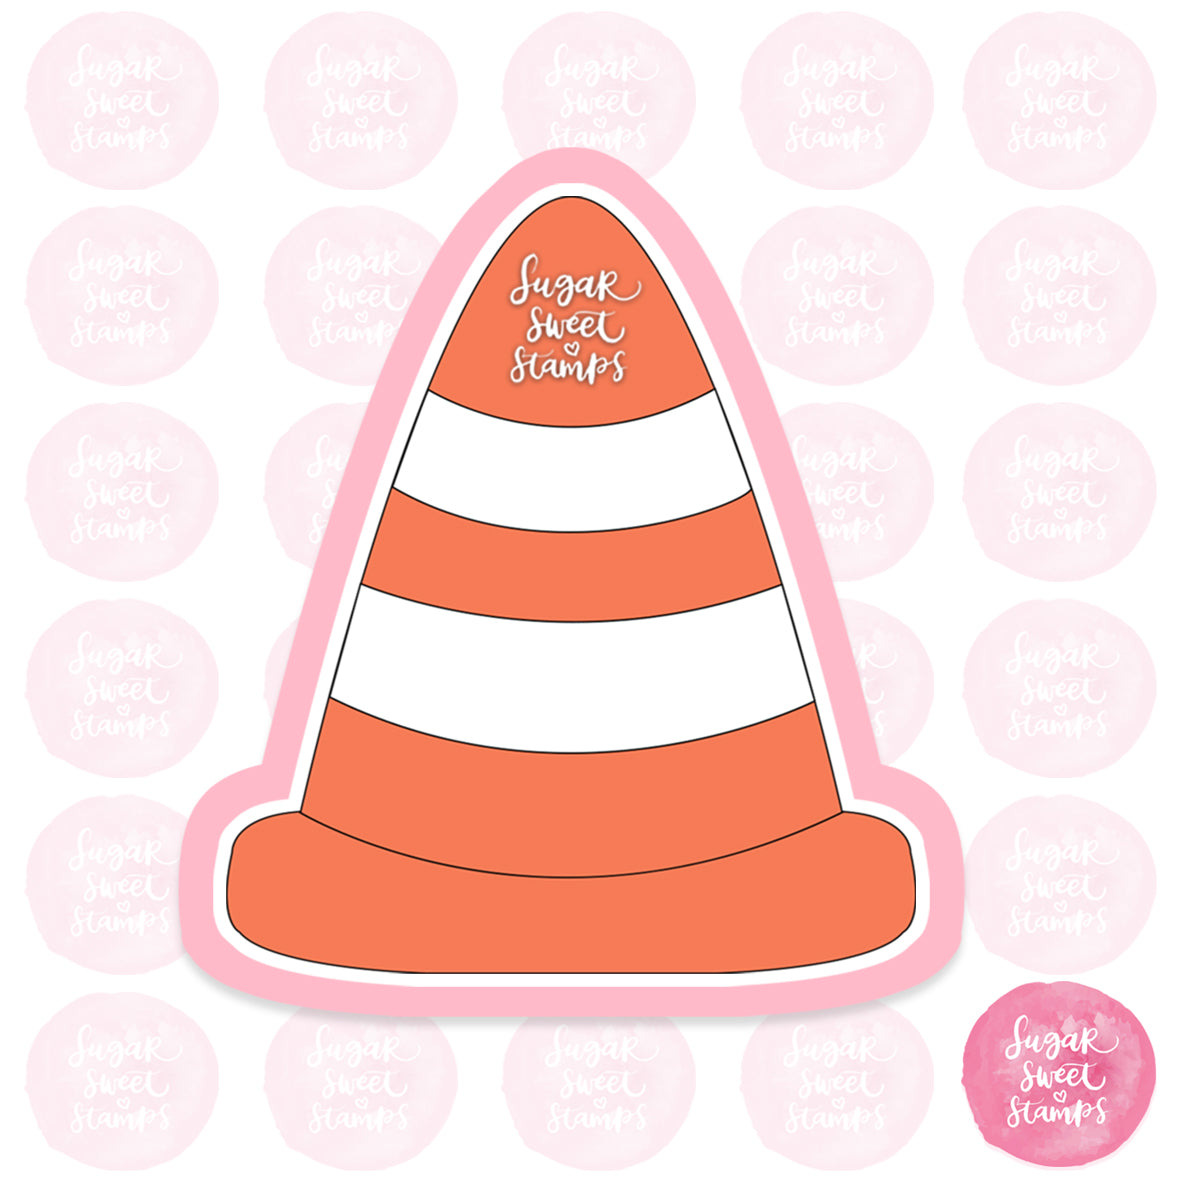 traffic cone road works cars vehicles construction custom 3d printed cookie cutter